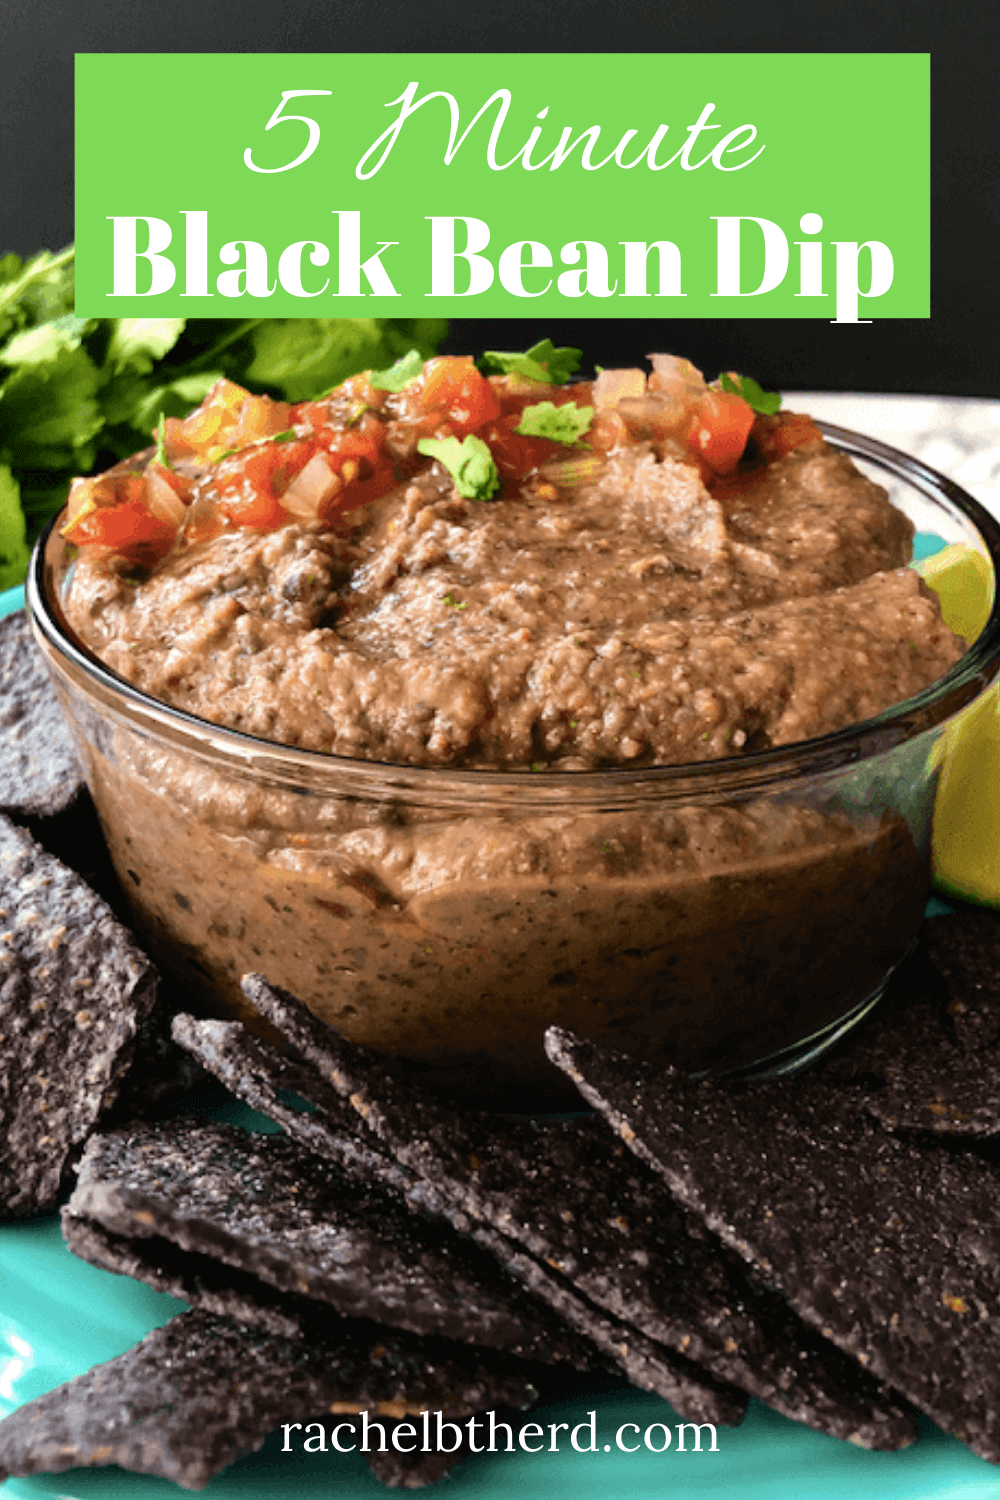 Black Bean Dip with tomatoes sprinkled on top served with tortilla chips